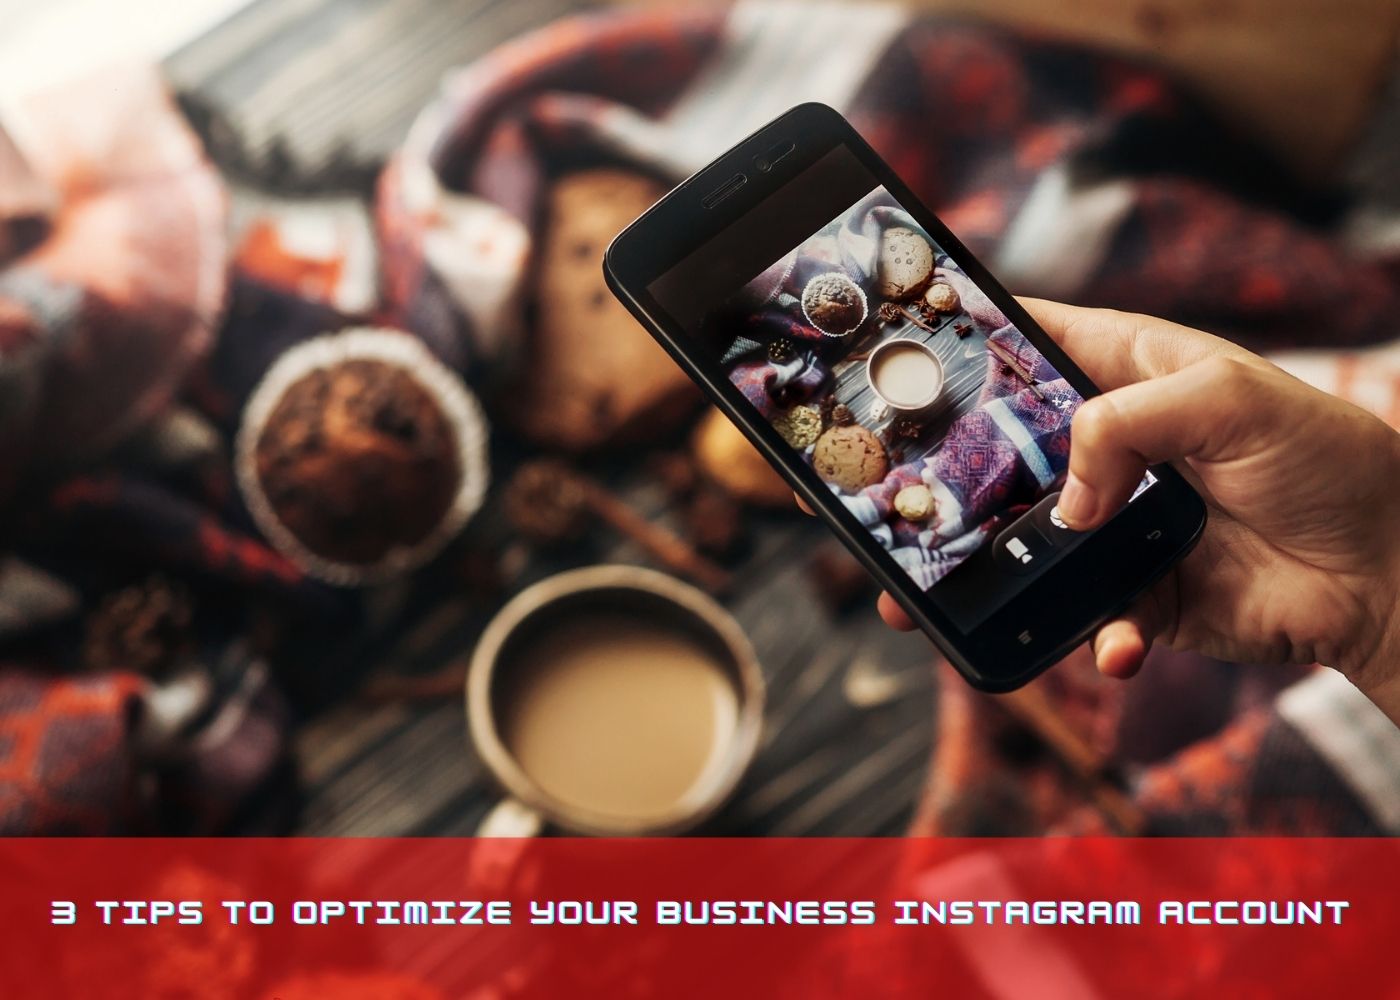 3 Tips to Optimize Your Business Instagram Account